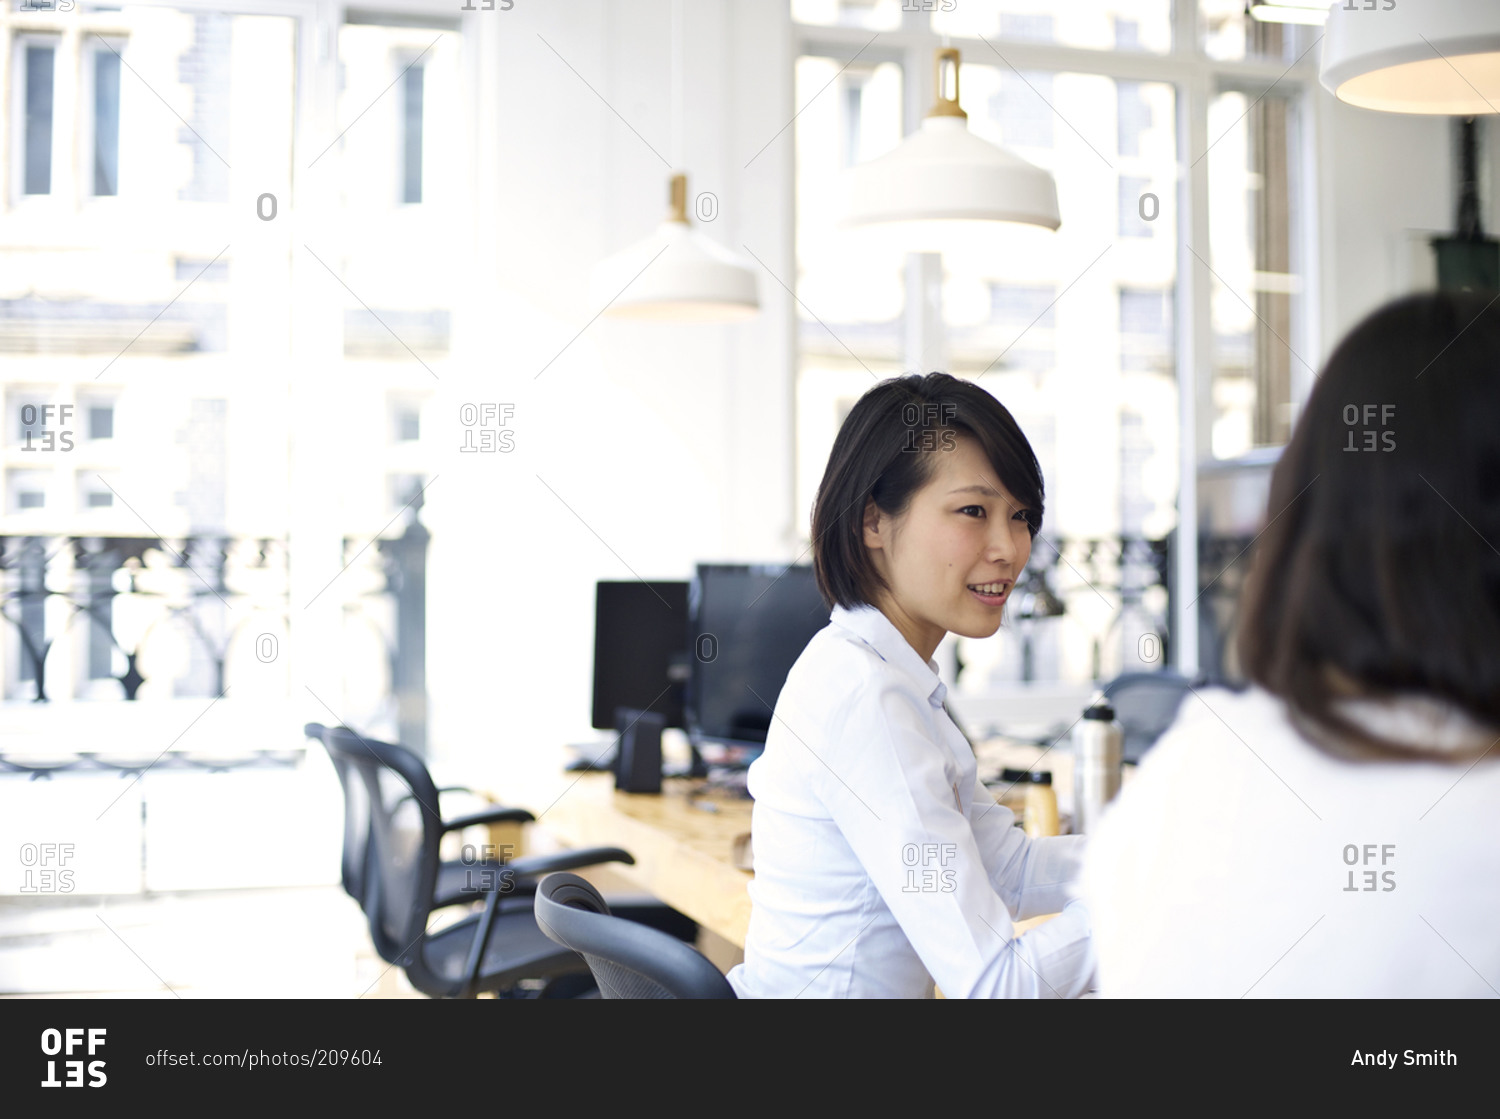 Office worker talking to her co-worker in an bright open work space